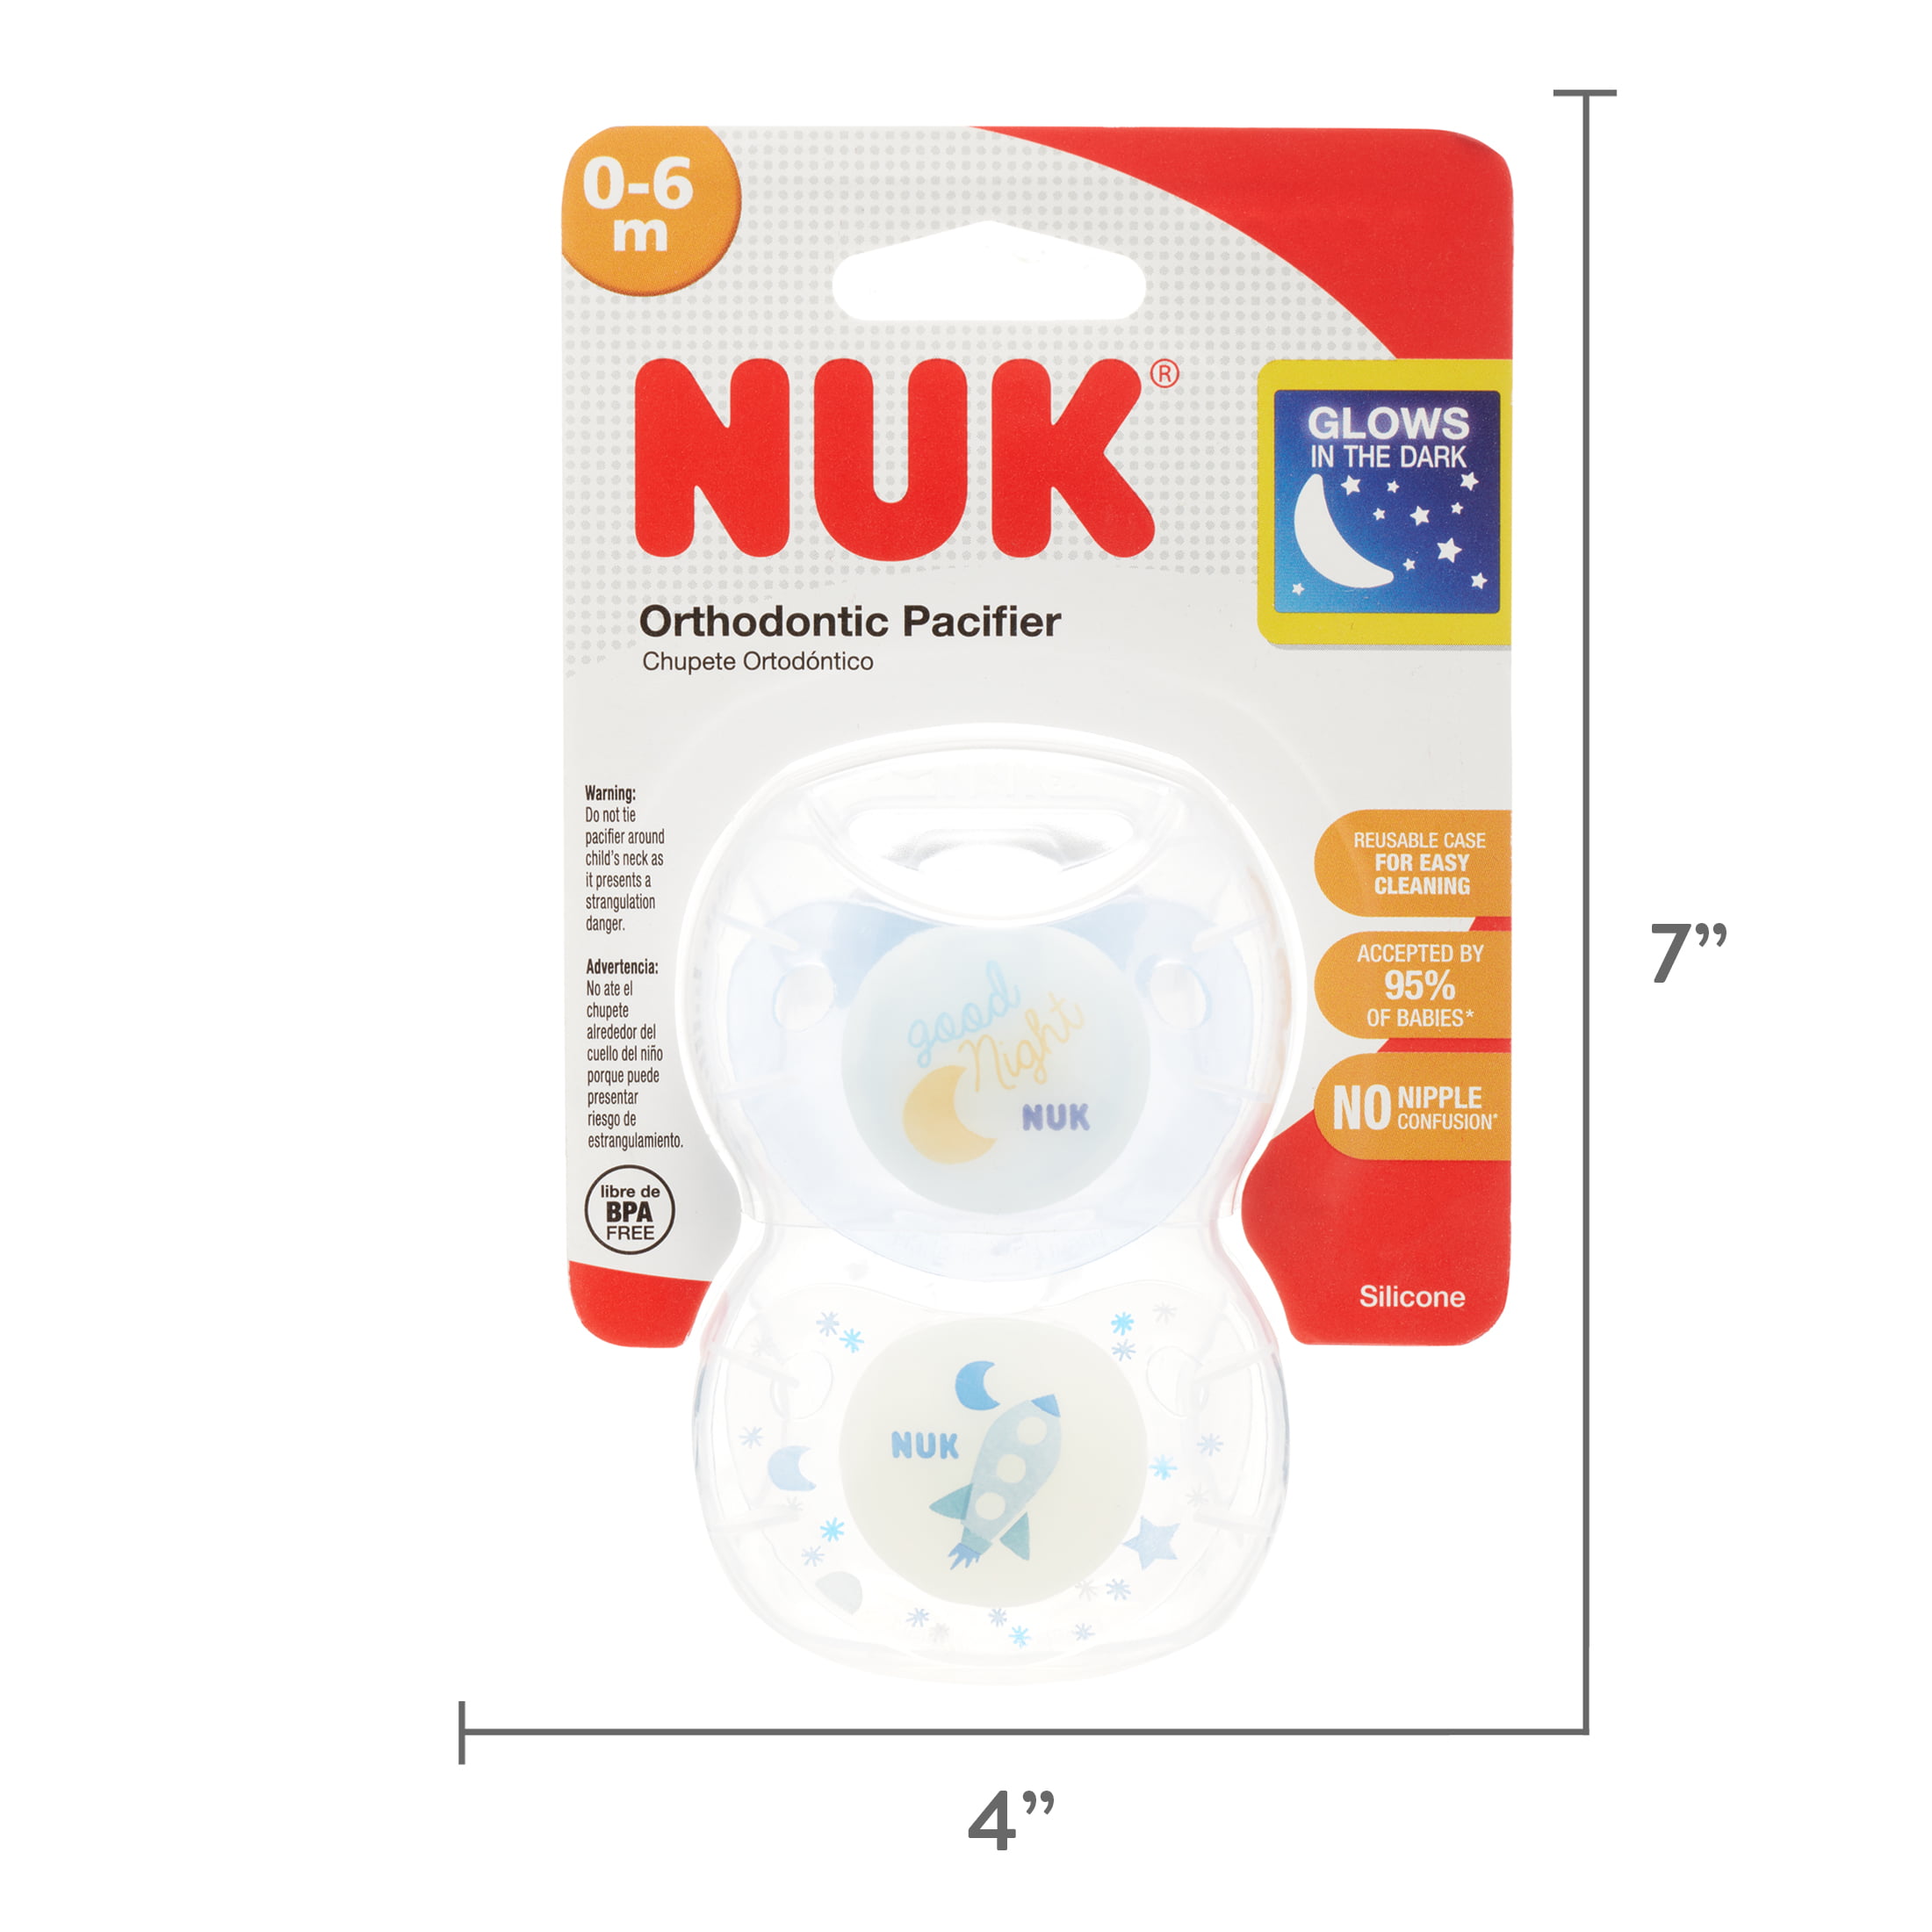 NUK Cute-as-a-Button Glow-in-The-Dark Orthodontic Pacifiers 0-6 Months 2-Pack Boy 